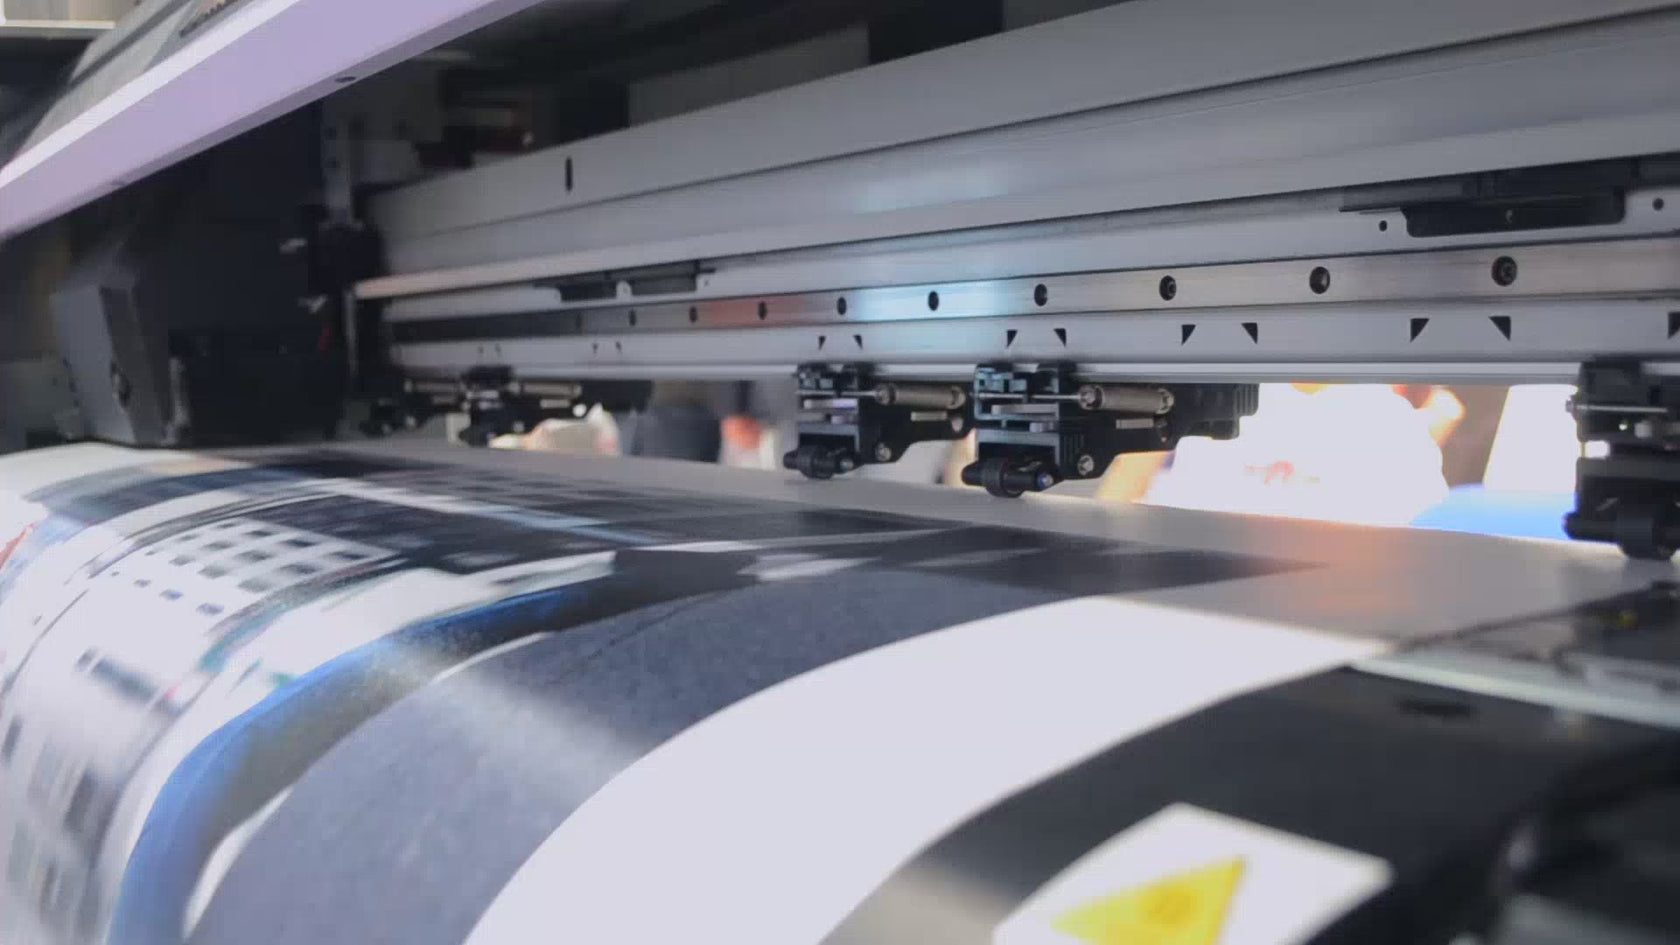 A video of a printer printing out a large format sign